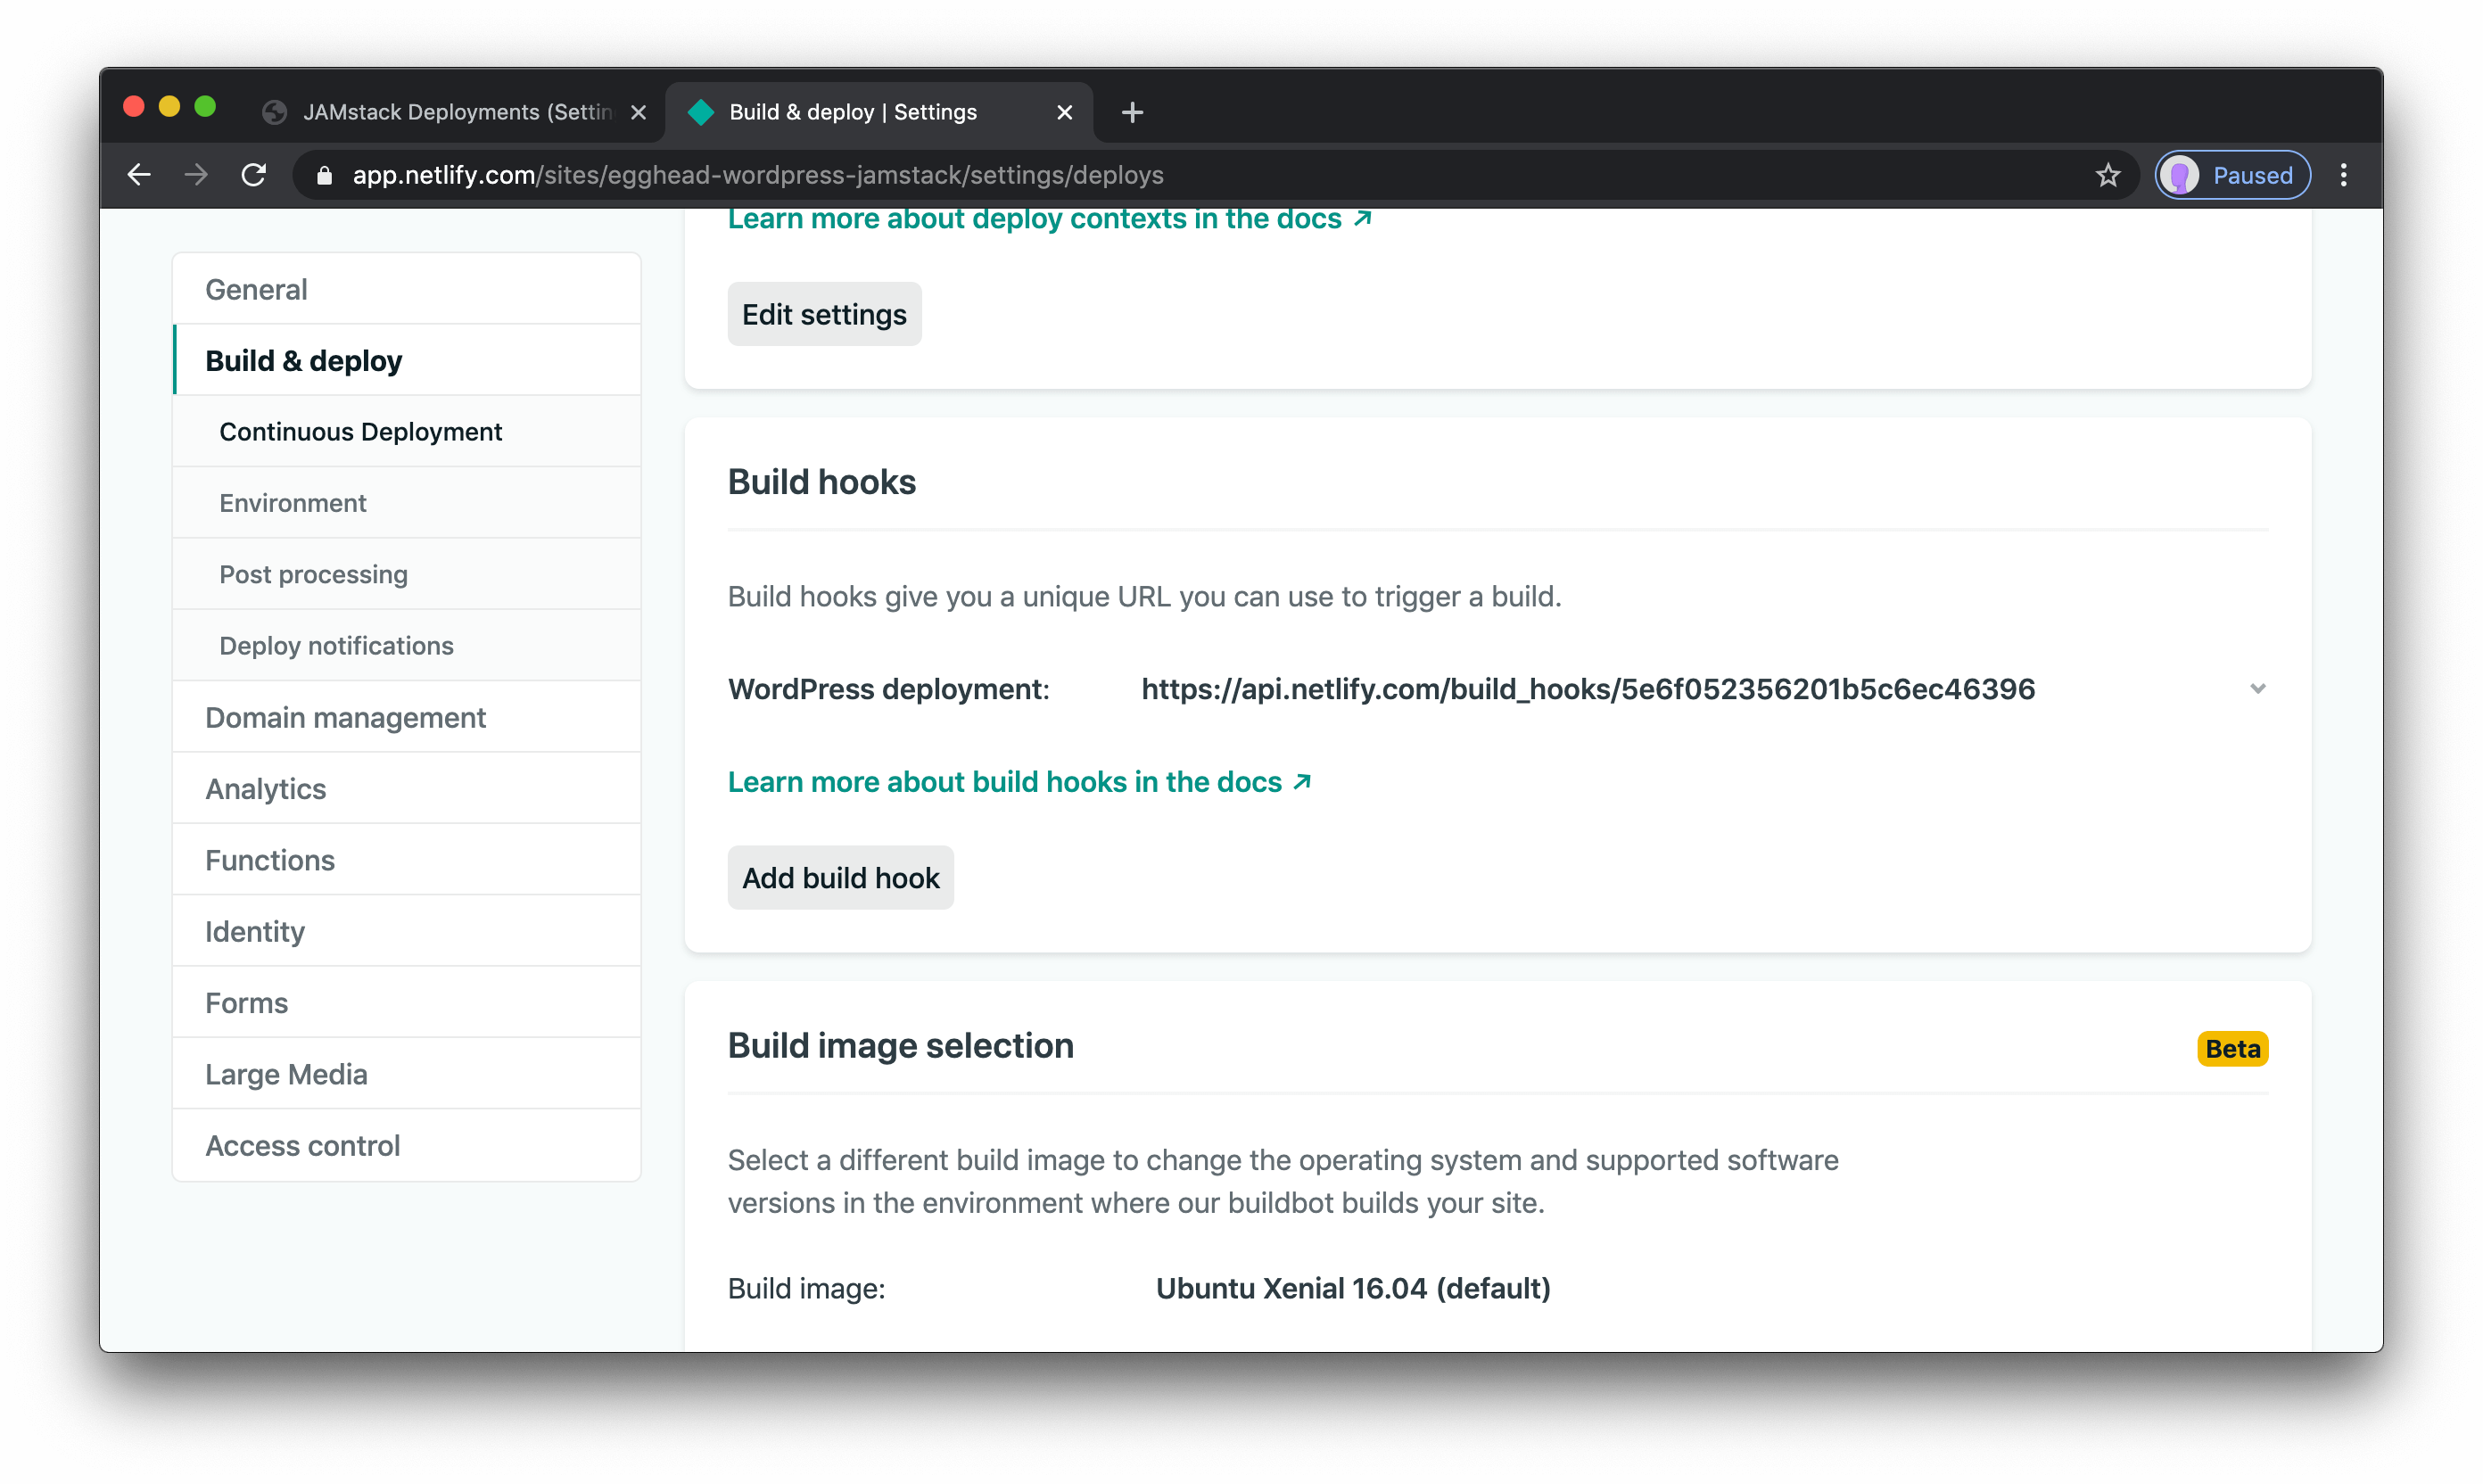 The build hook section of the Netlify settings.